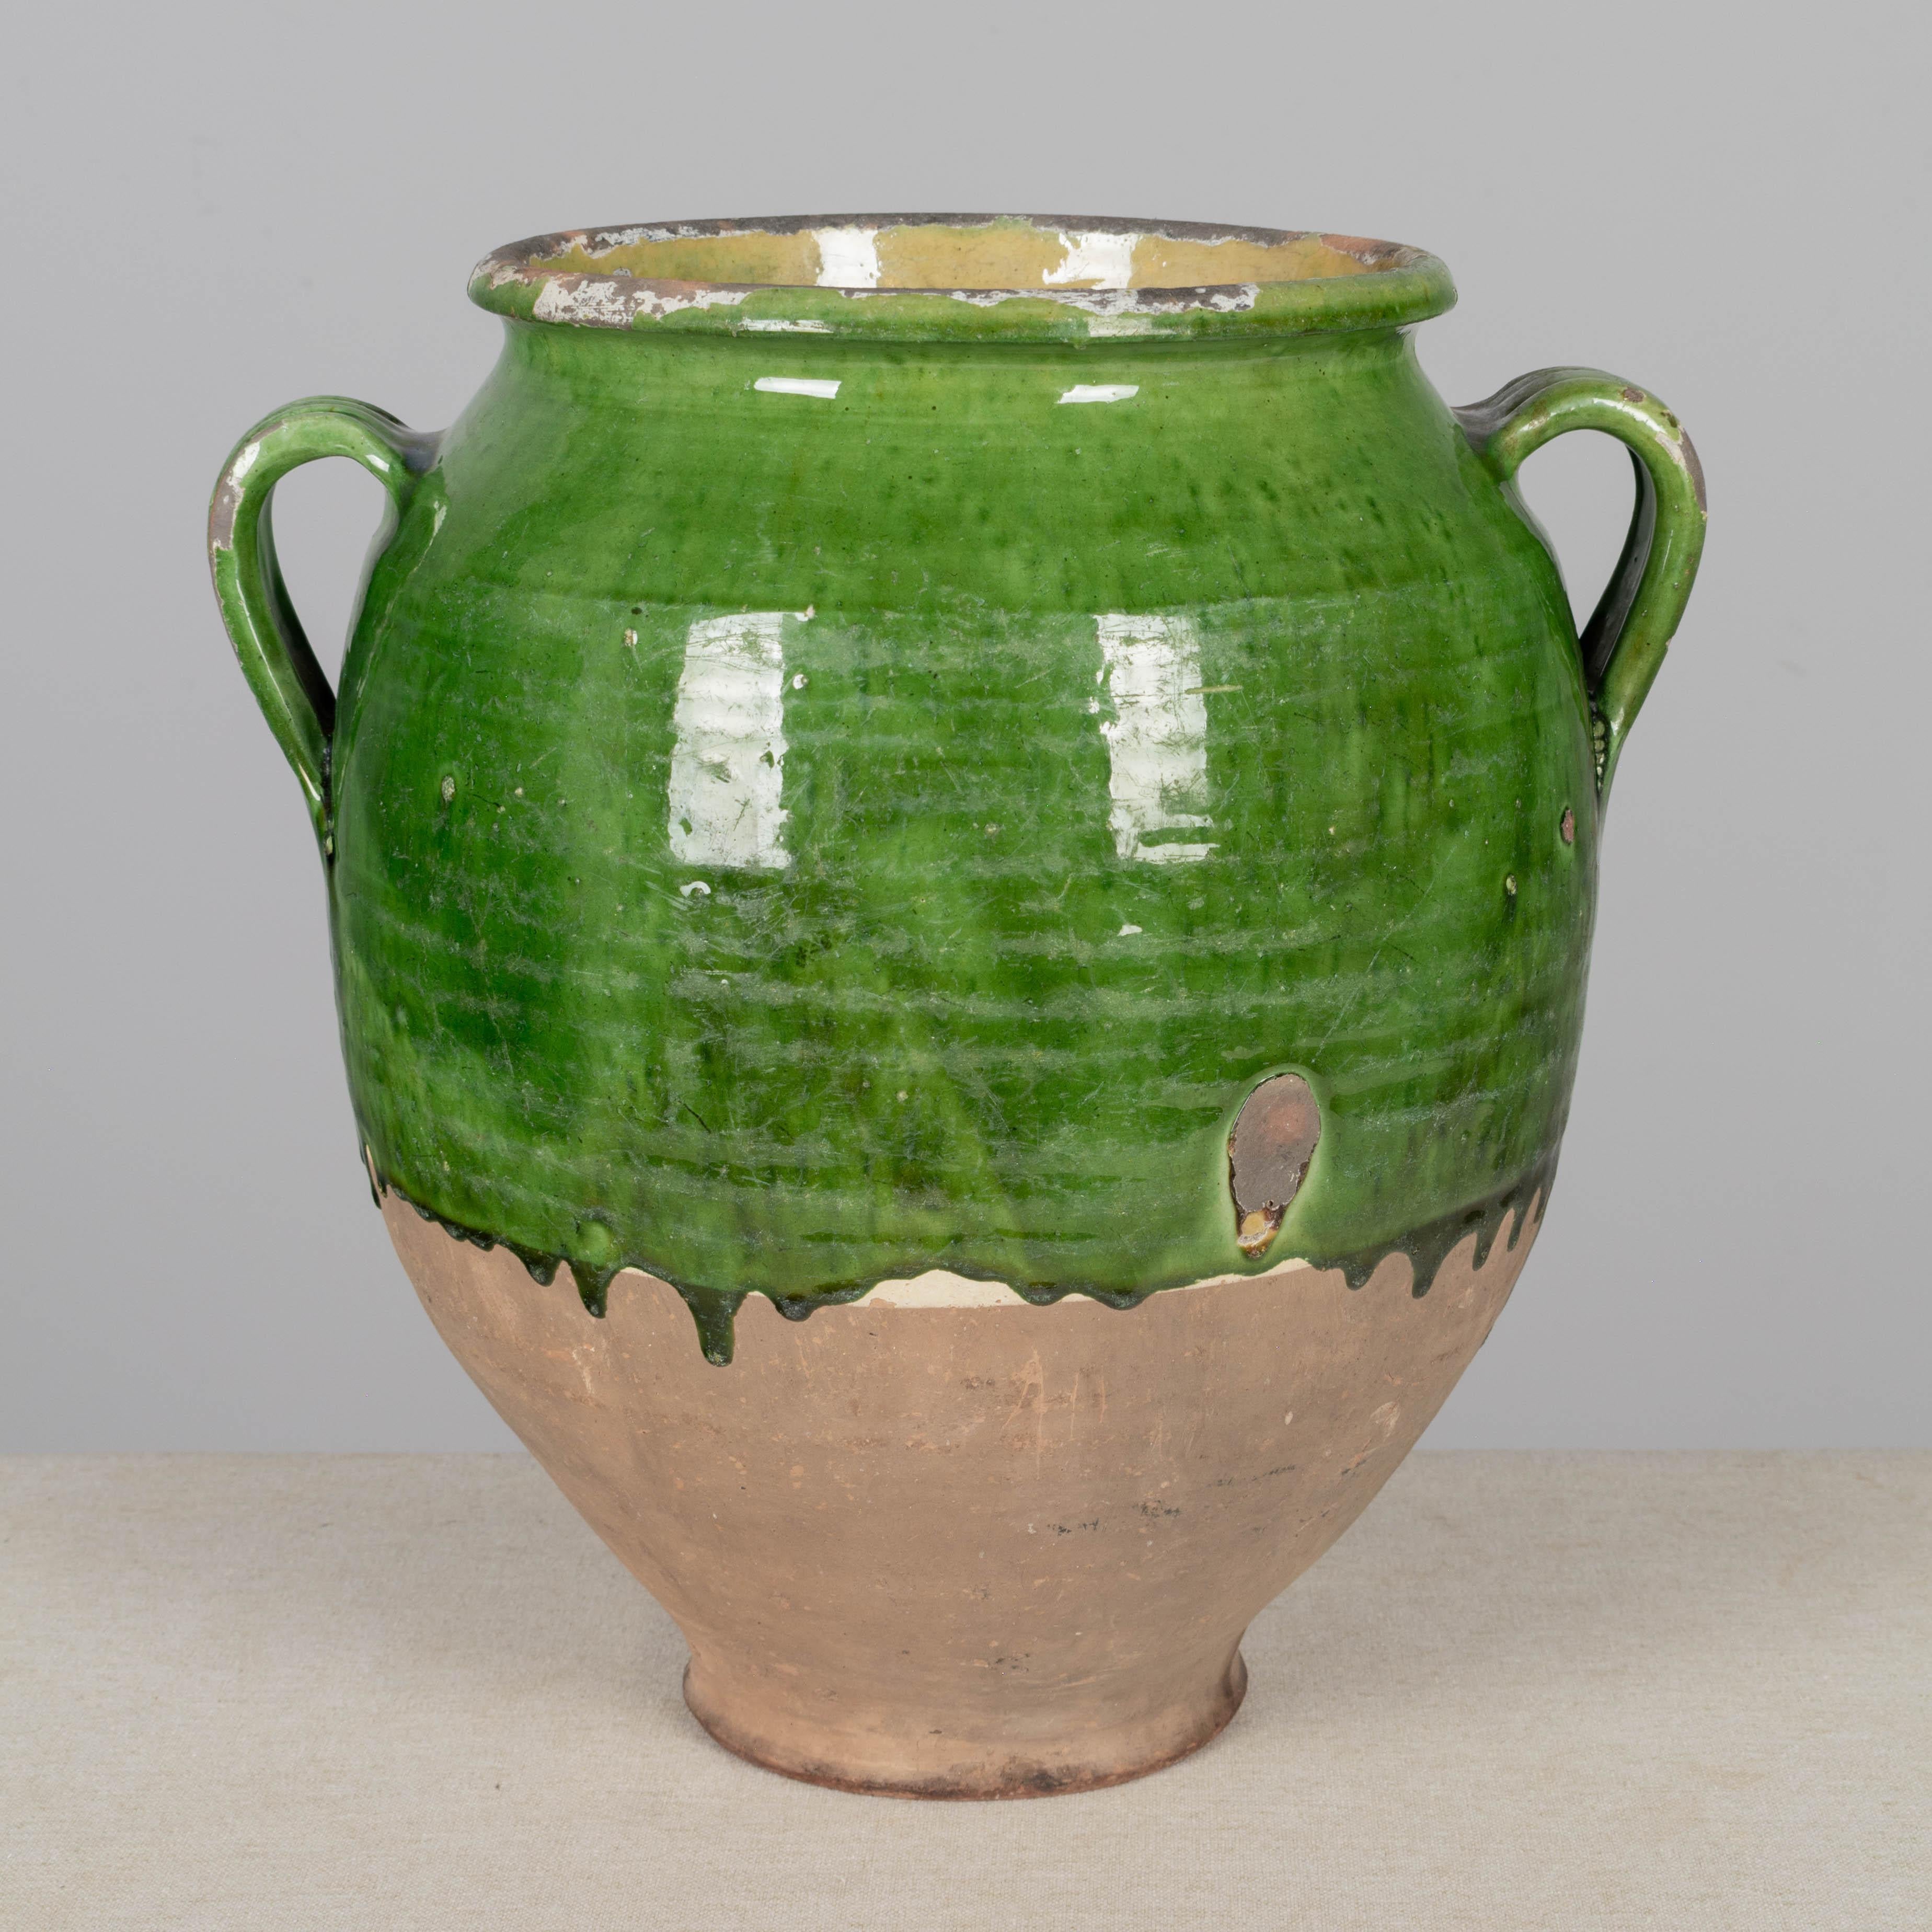 A 19th century French earthenware confit pot with traditional green glaze and pale yellow interior. Some chips and losses to glaze. These ordinary earthenware vessels were once used daily in the French country home and have beautiful rustic glazes